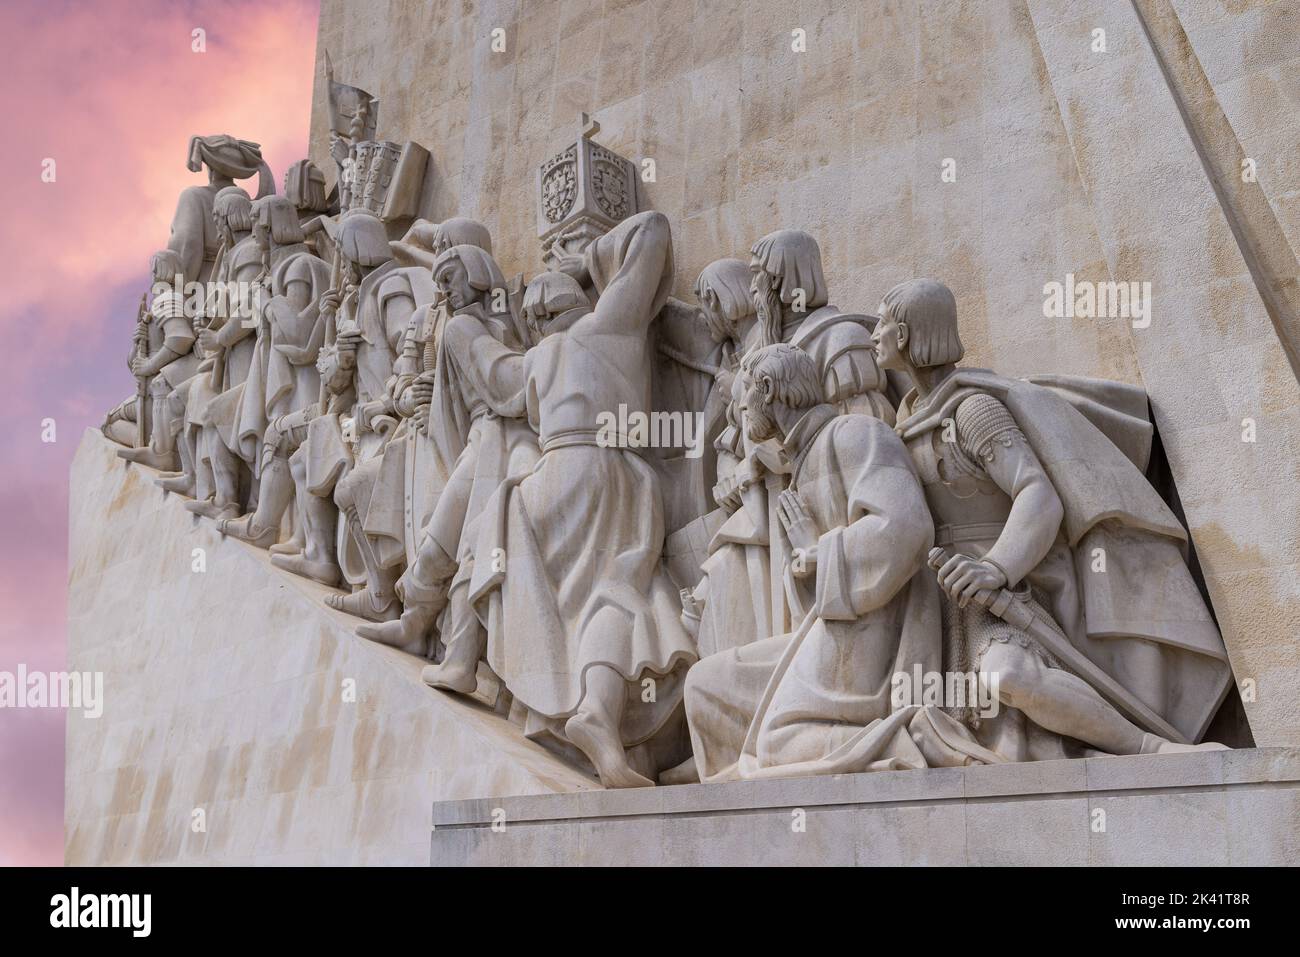 Padrão dos Descobrimentos, Monument to the Discoveries in Belém, Lisbon, Portugal. The landmark in Belém is located along the Tagus river. Stock Photo